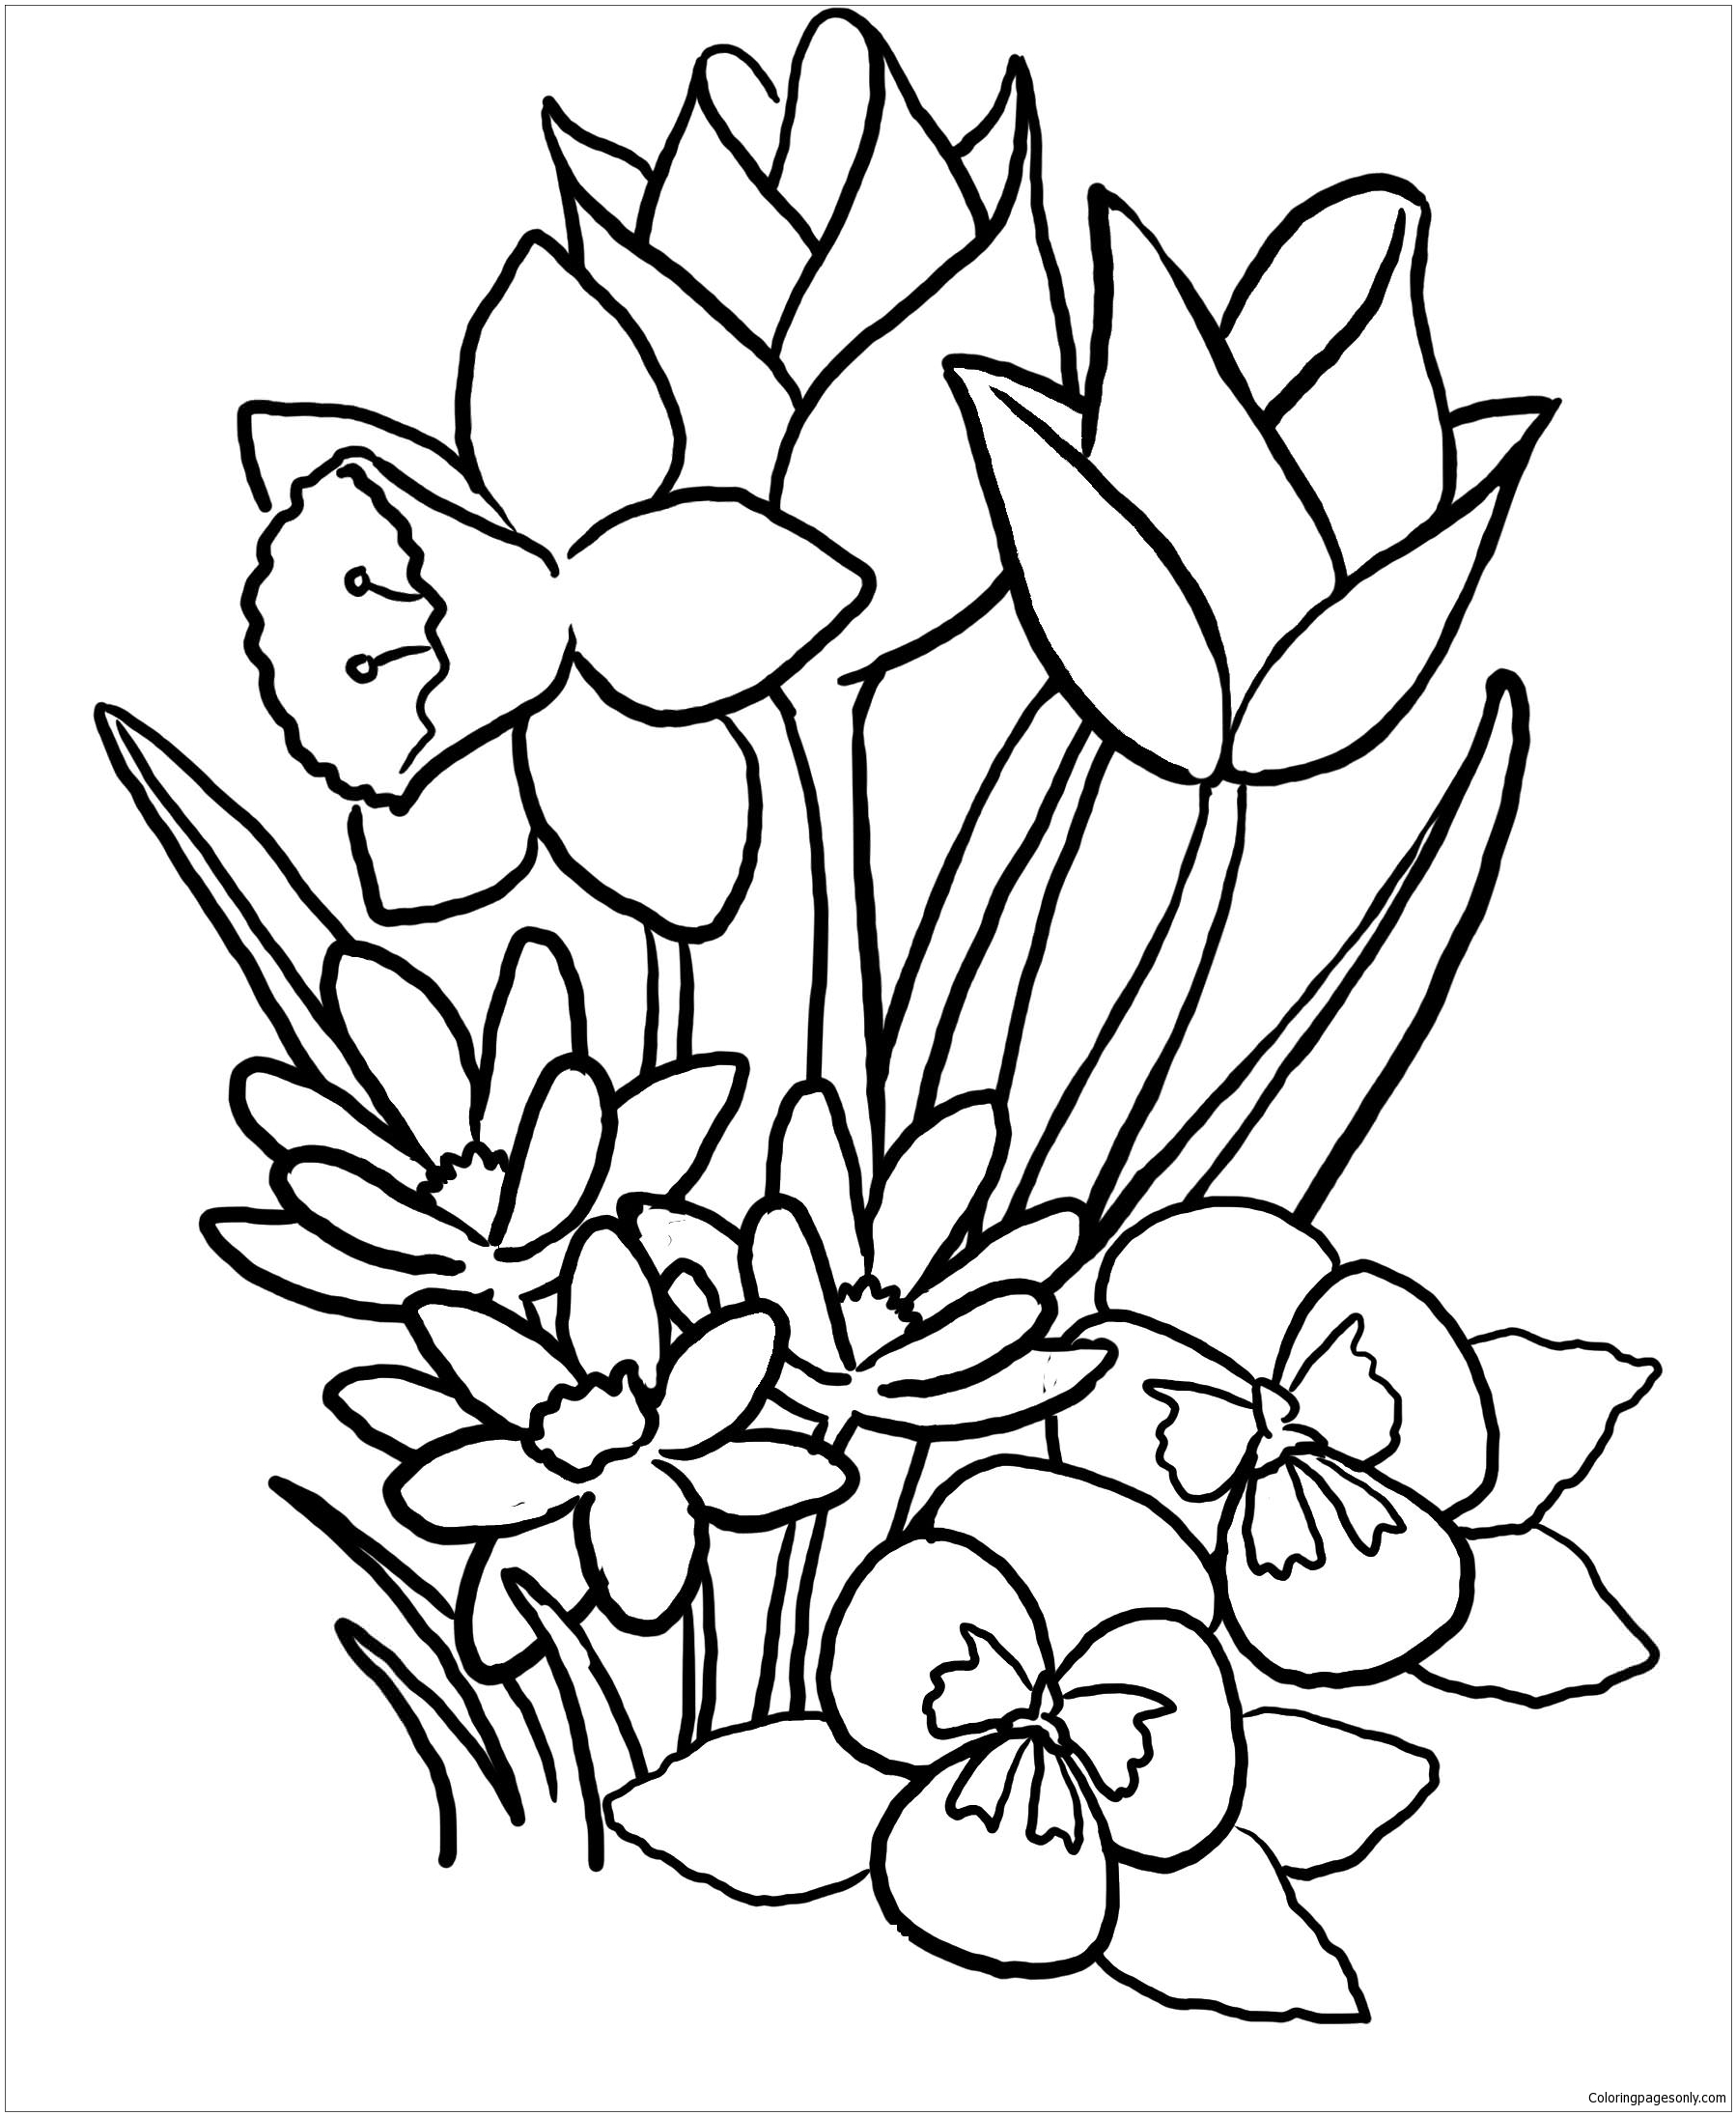 Spring Flowers 1 Coloring Page Free Printable Coloring Pages